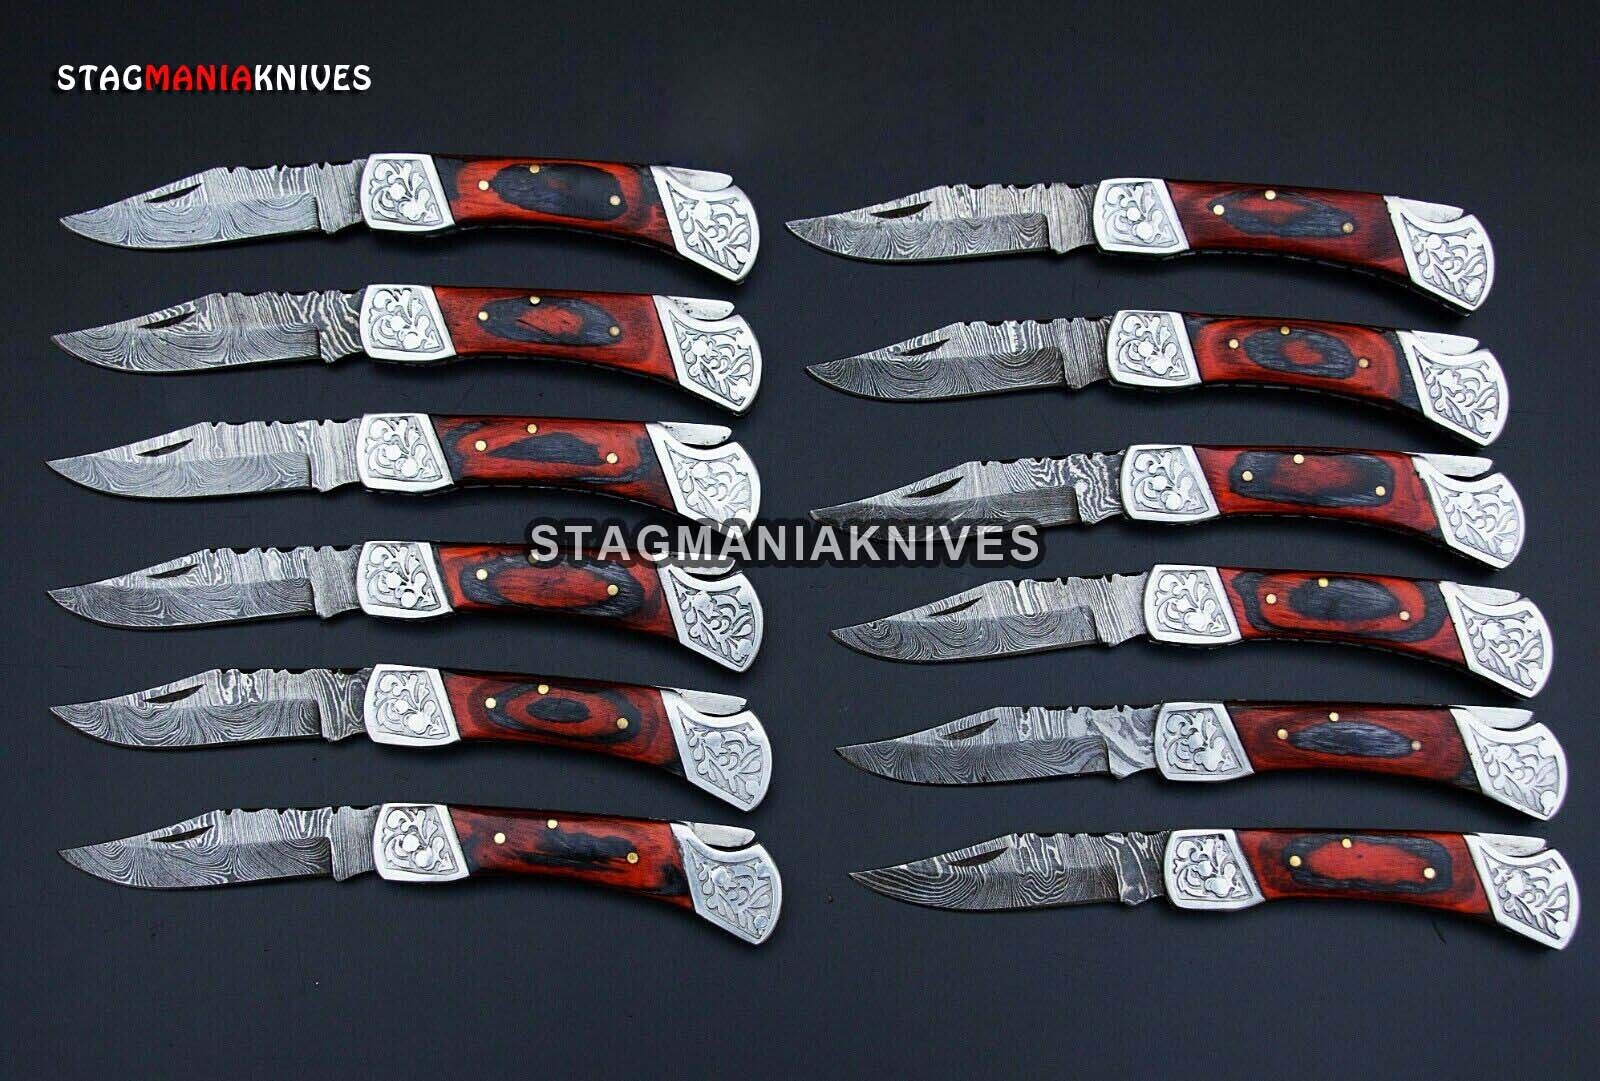 Premium Hand Forged Damascus Steel Hunting Knife Pocket Knife Lot of 12 Pcs